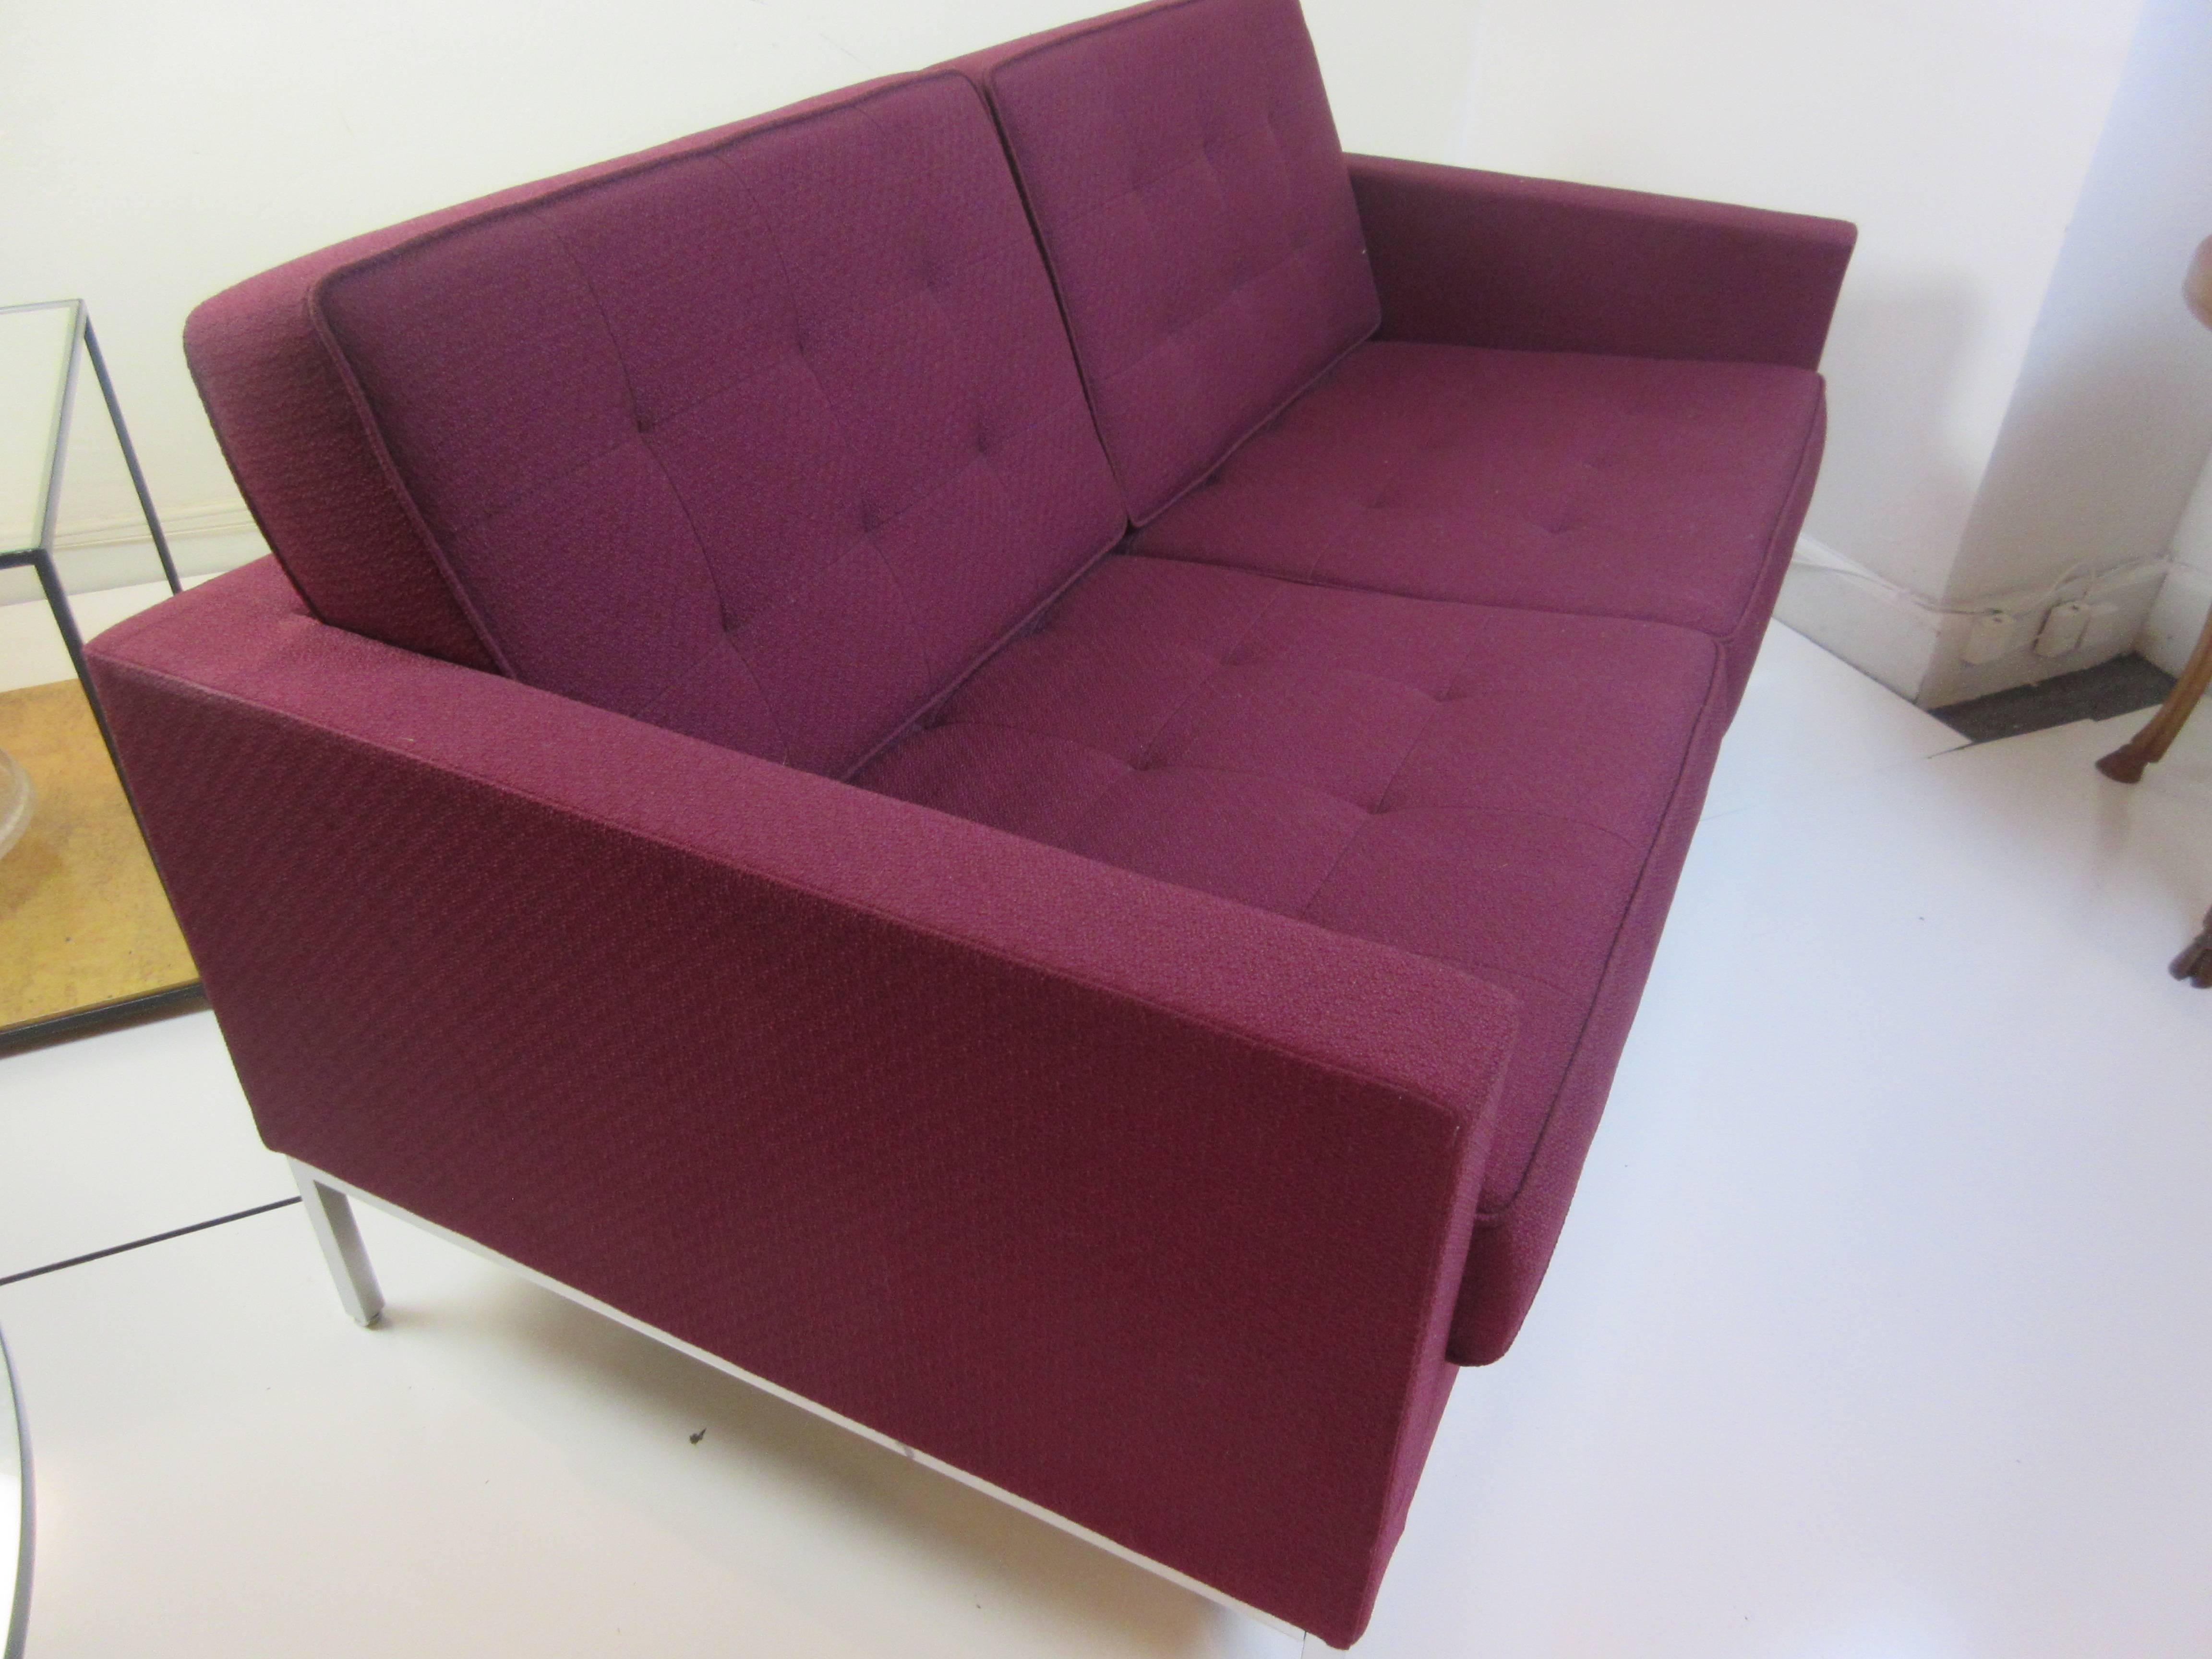 Florence Knoll settee in Knoll Rochelle purple fabric. Part of her 1954 series of seating for Knoll this is a 2010 addition and in perfect condition.